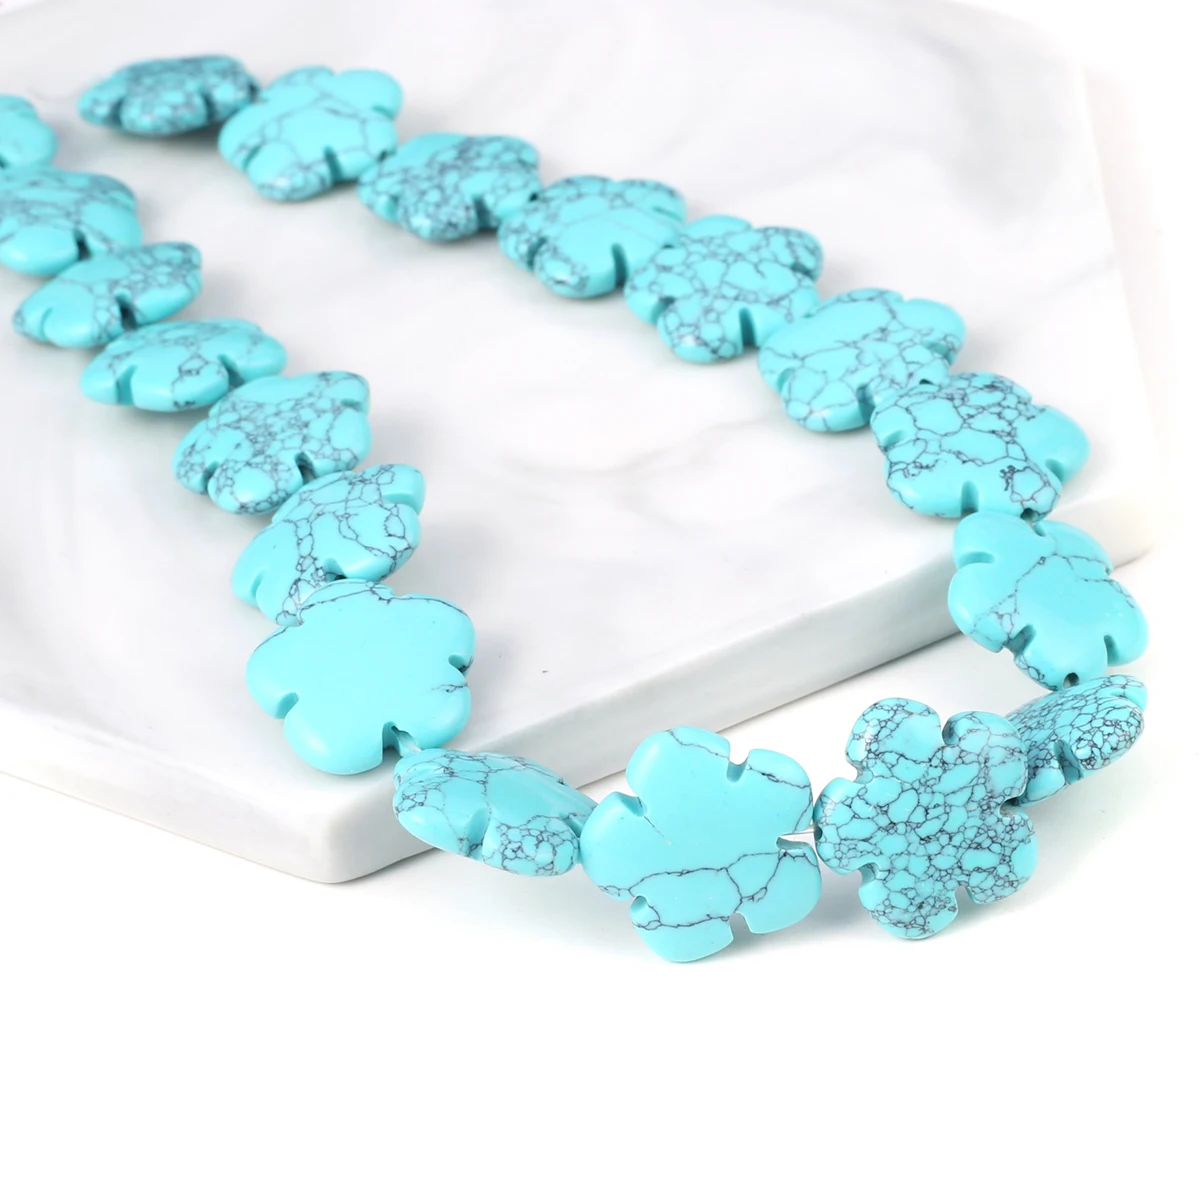 

Natural Stone Floral Rose Quartz Opal Perforated Spacer Beads DIY Bracelet Necklace Jewelry Accessories Gift